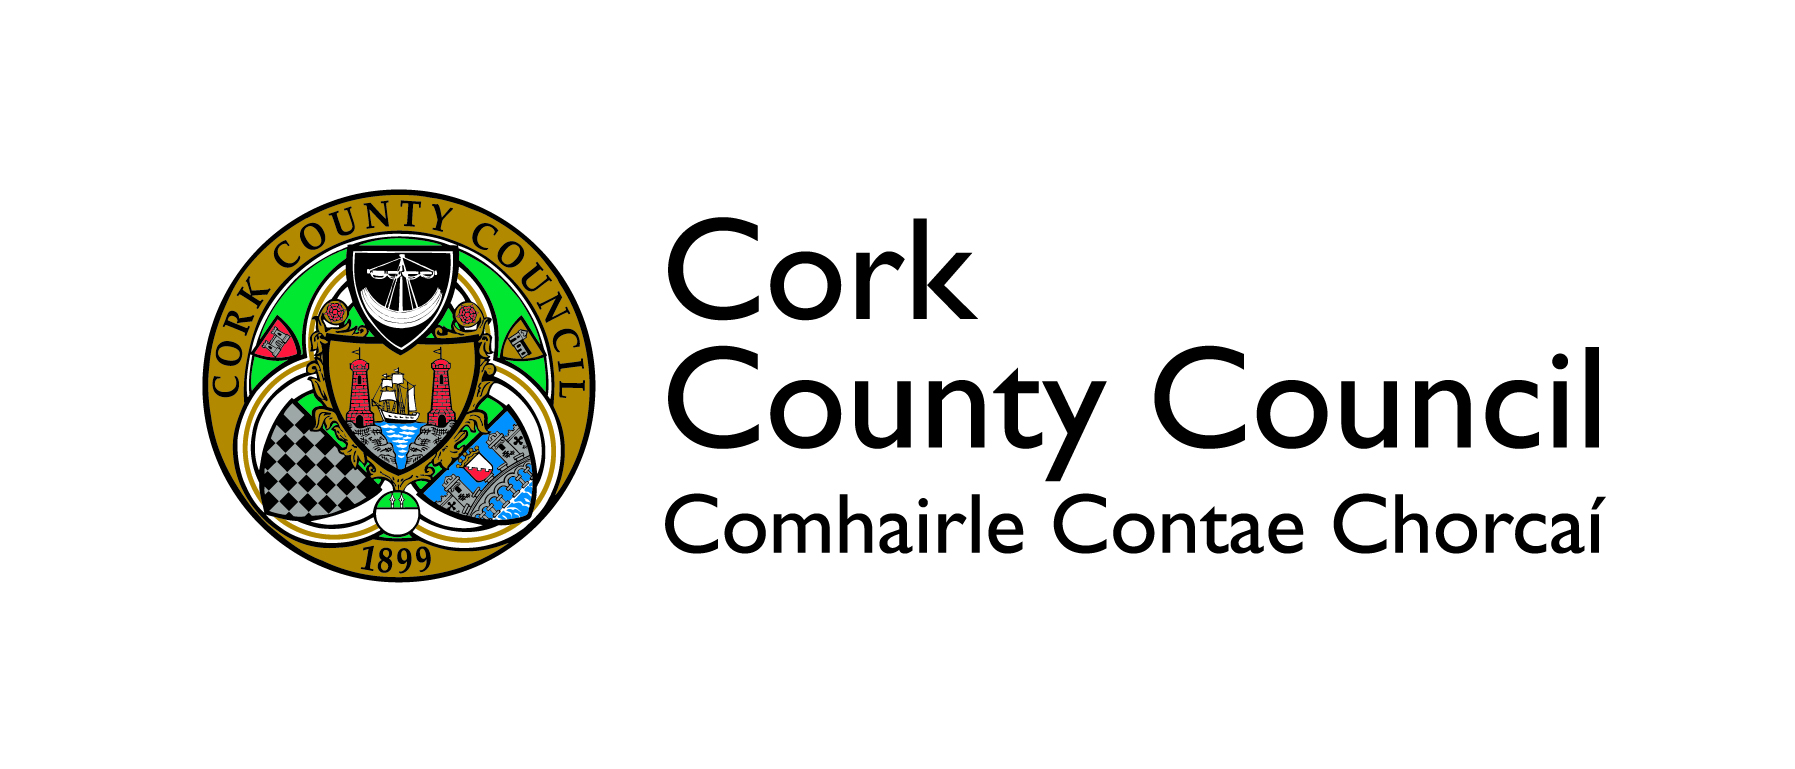 Public Consultation on Draft Municipal District Local Area Plans for Cork County Commences